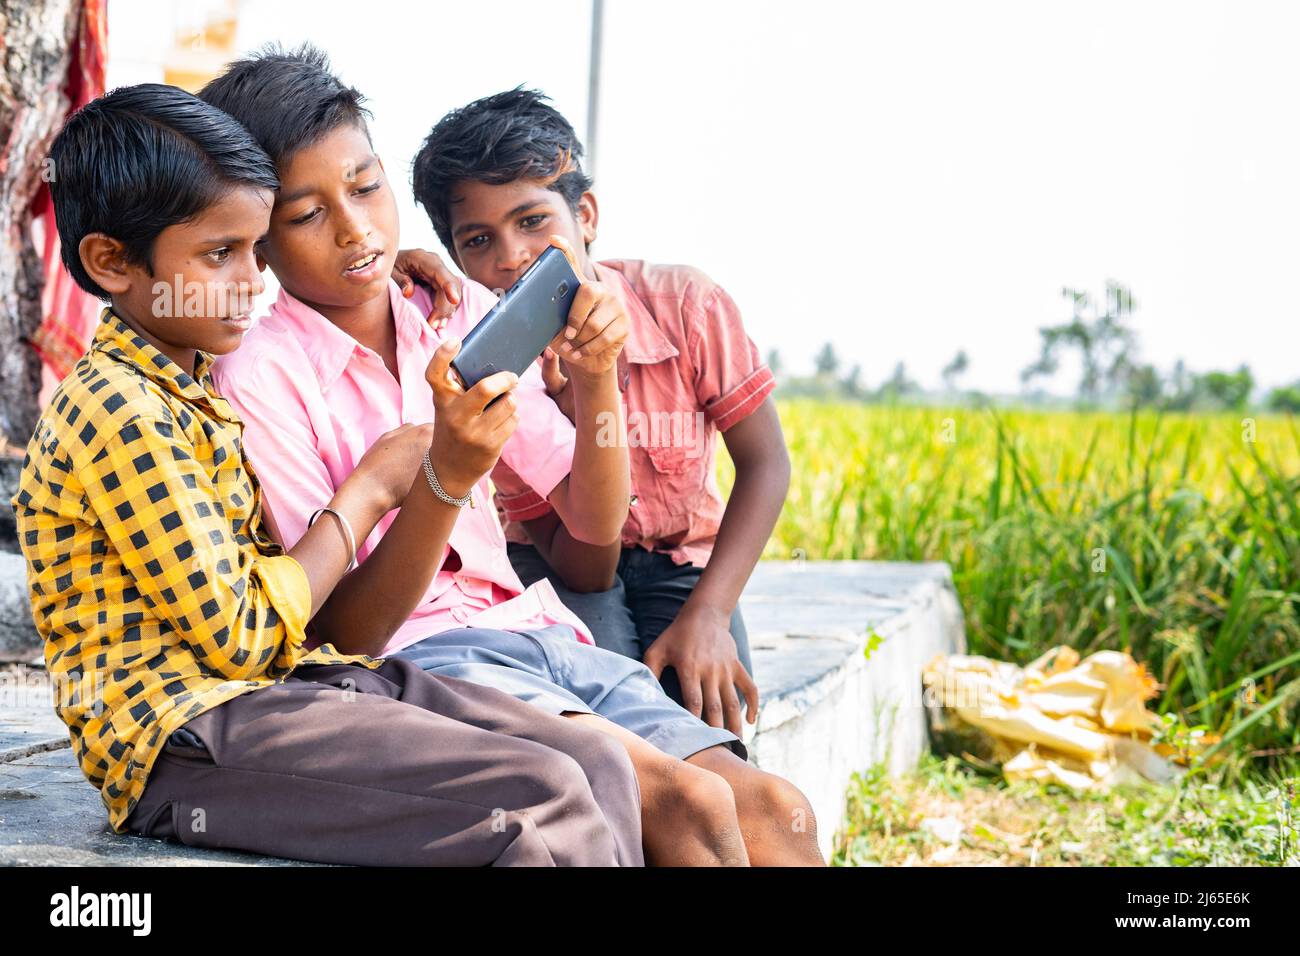 Indian village teenage kids playing video game on mobile phone near paddy field - concept of technology, togetherness and development Stock Photo